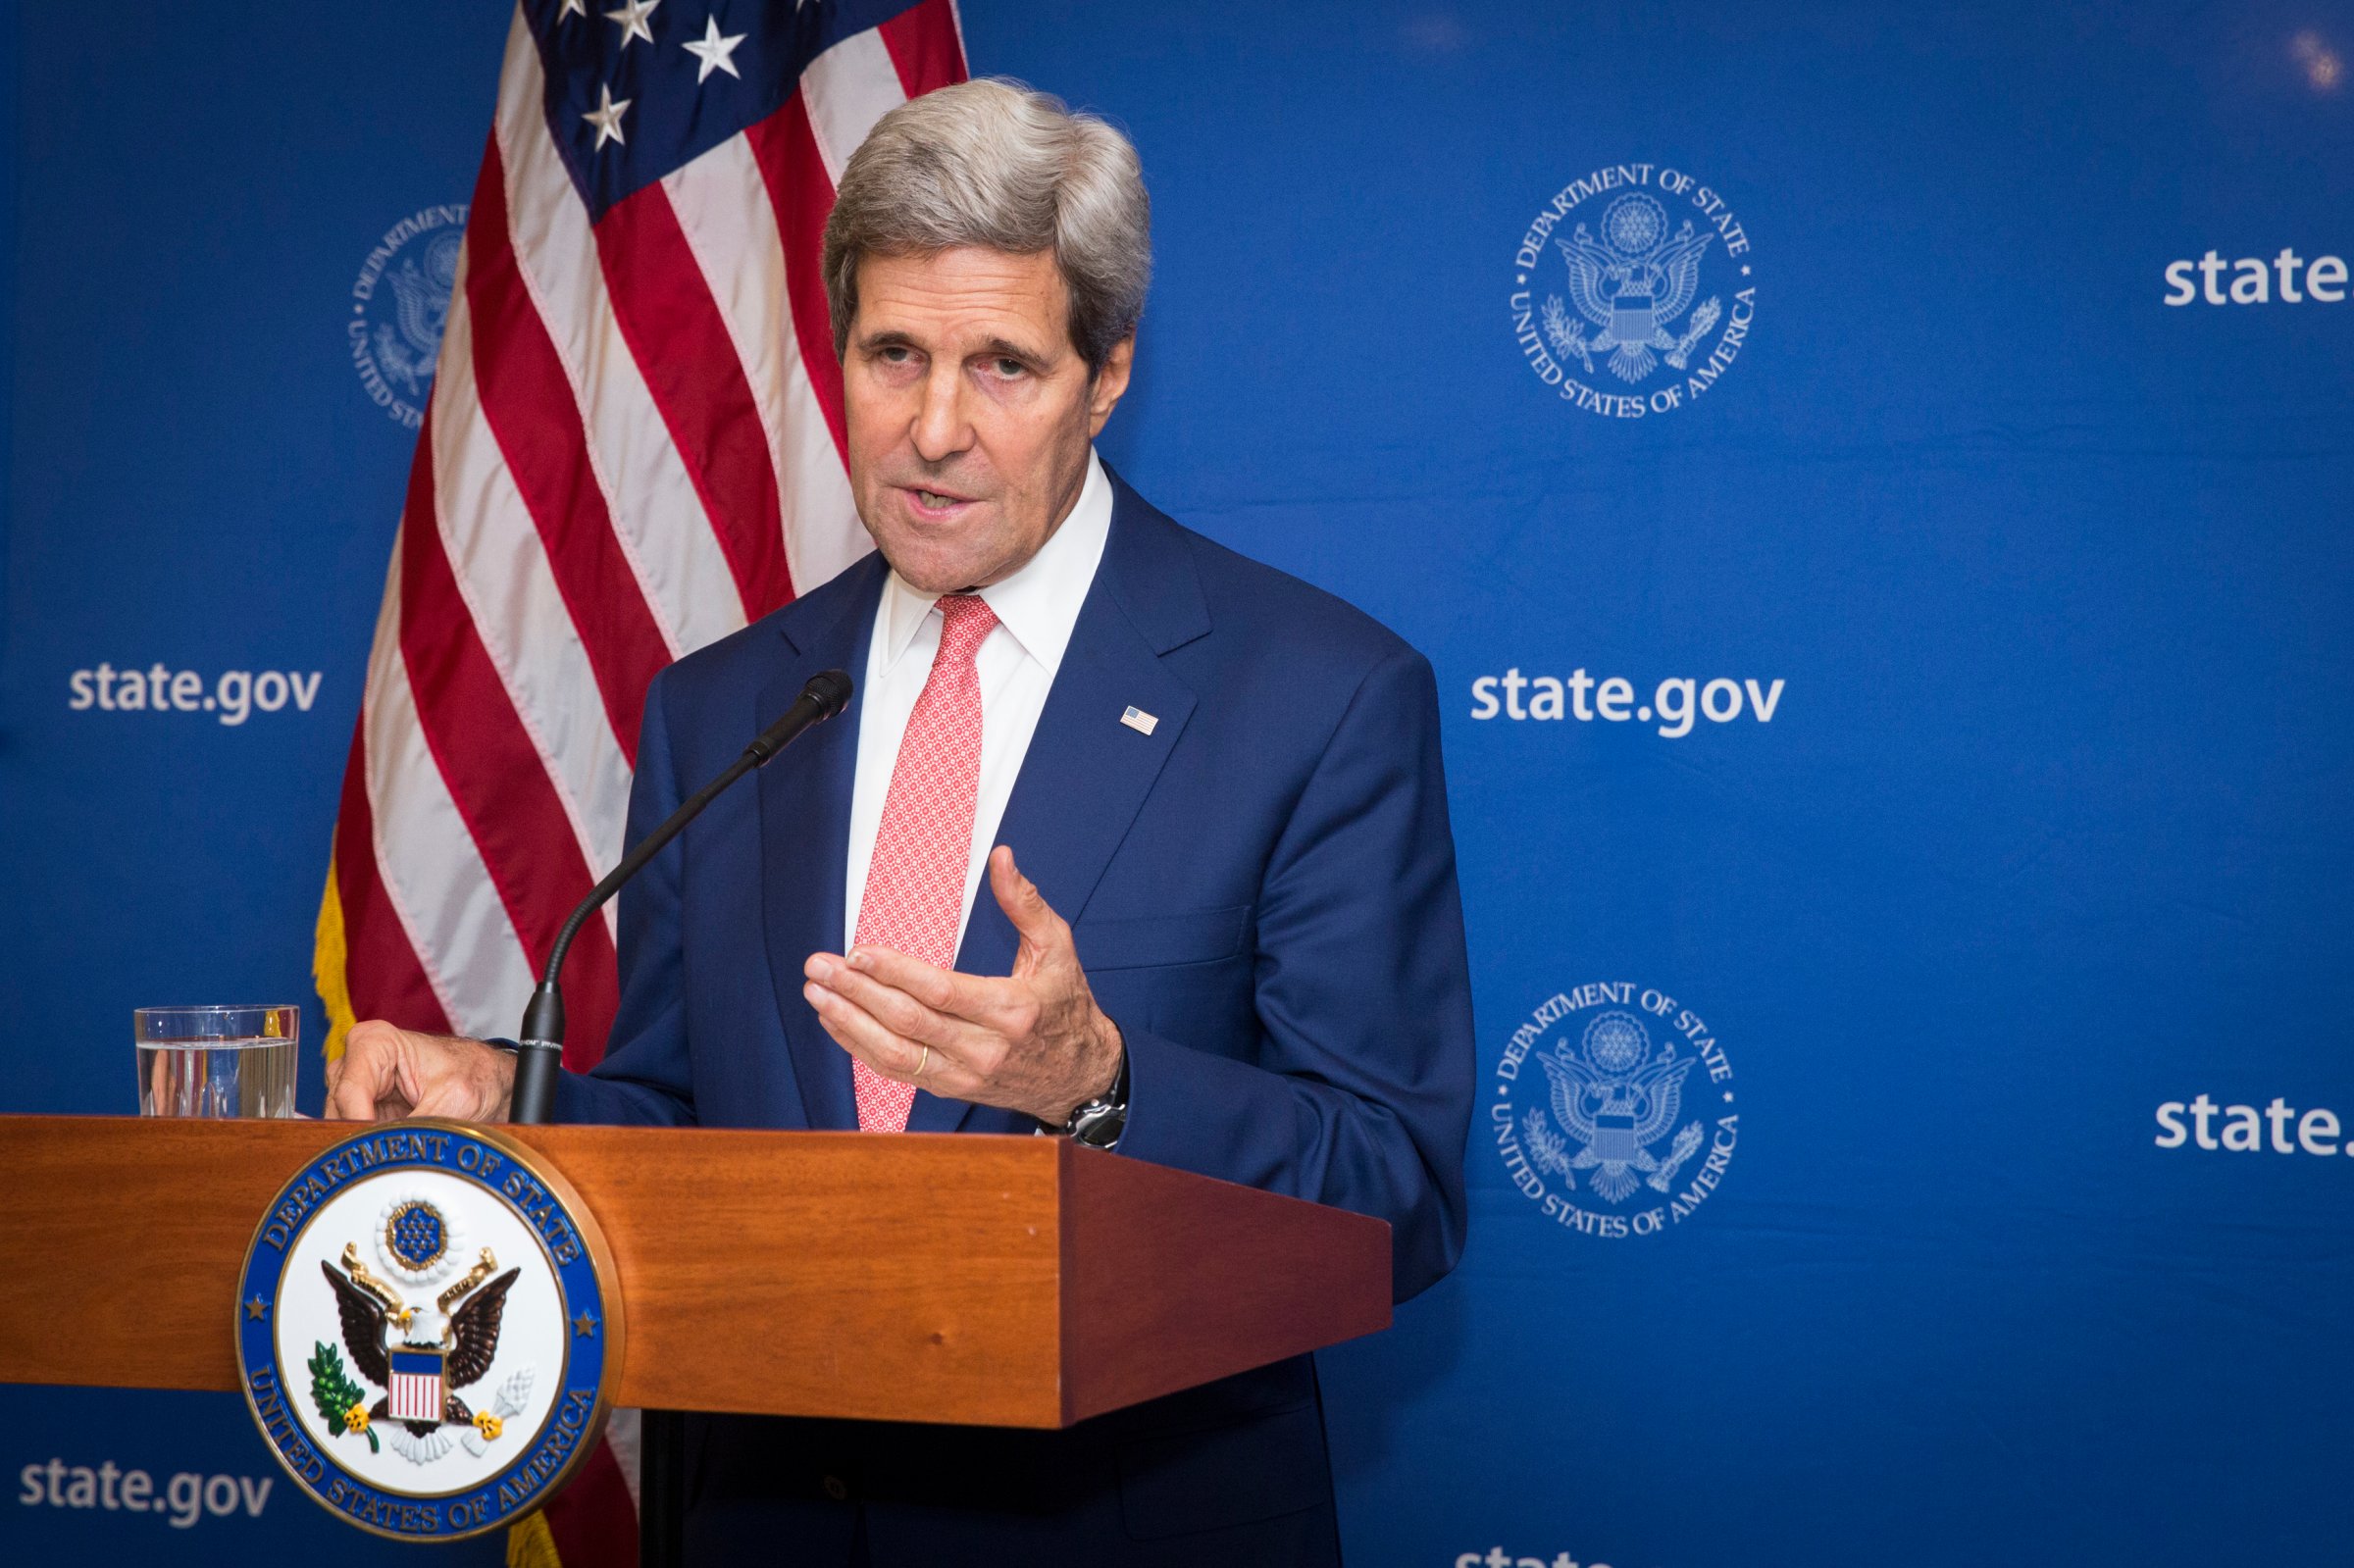 U.S. Secretary of State John Kerry announces a 72-hour humanitarian cease-fire beginning Friday between Israel and Hamas, in New Delhi, India on August 1, 2014.